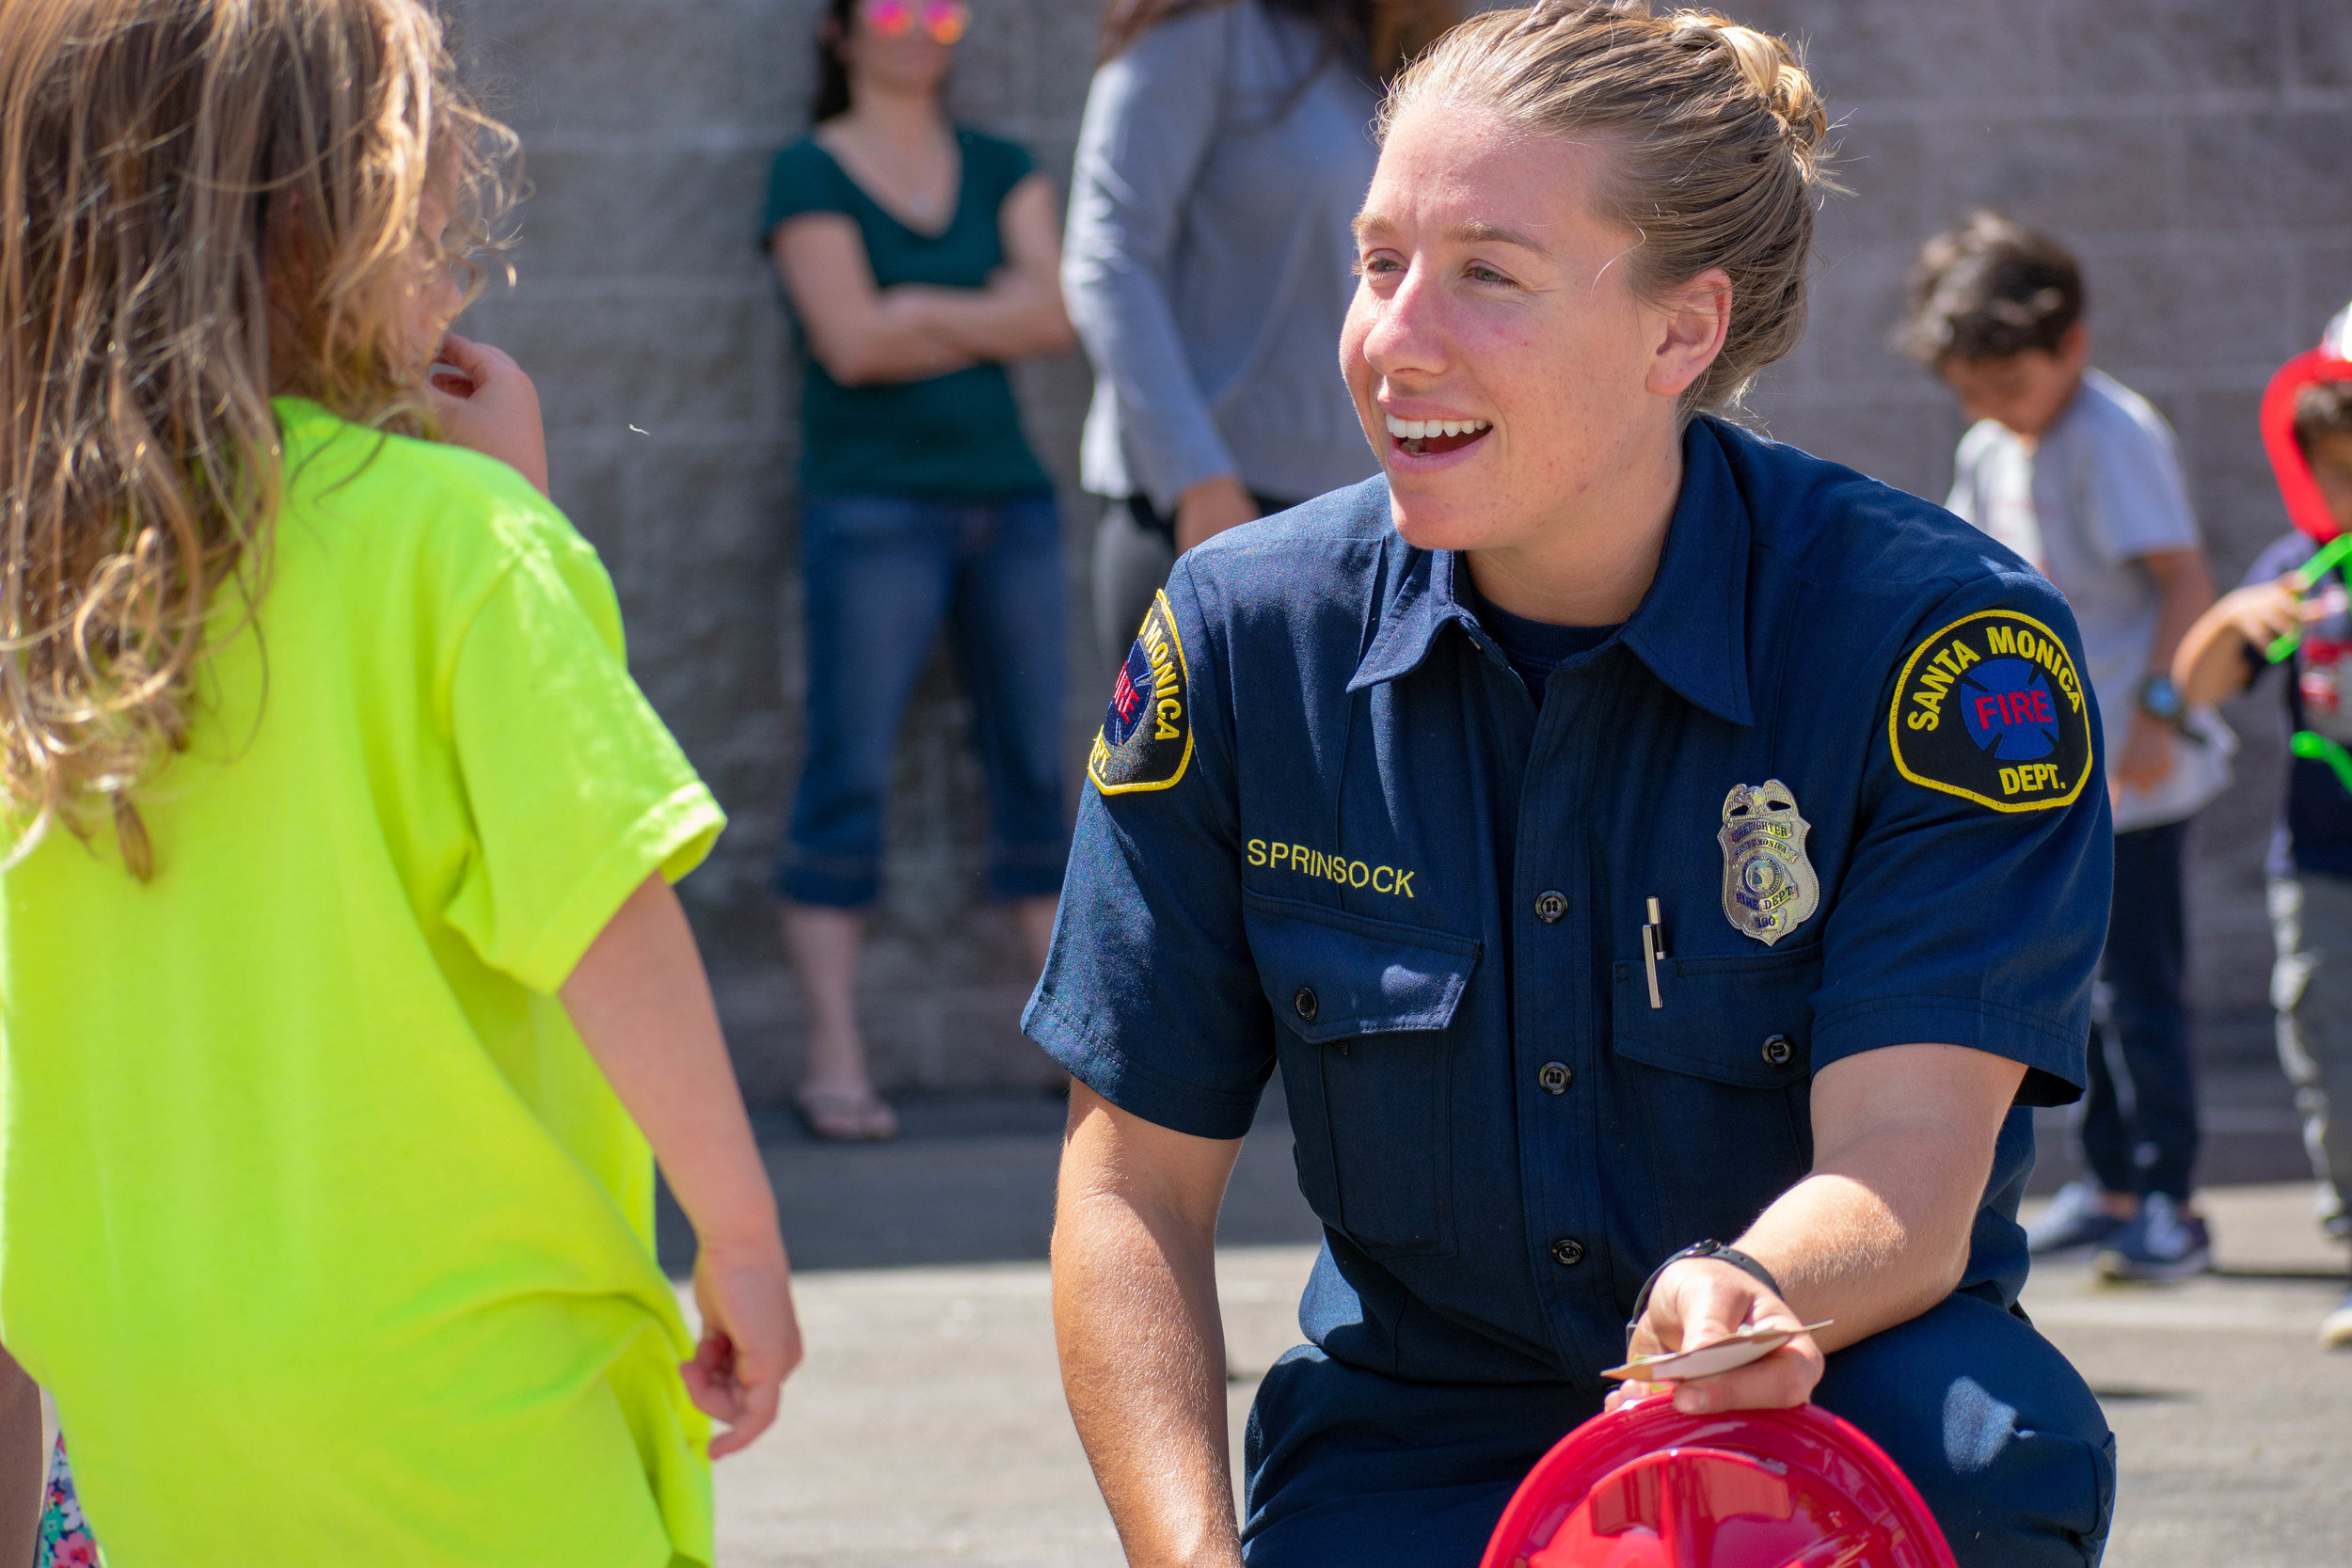  Maya Sprinsock helps kids into a fire engine during a groundbreaking event in downtown Santa Monica on Saturday, June 2 at the location for the newest station. Located on 1444 7th St, the station will be replacing Fire Station No. 1, which is curren